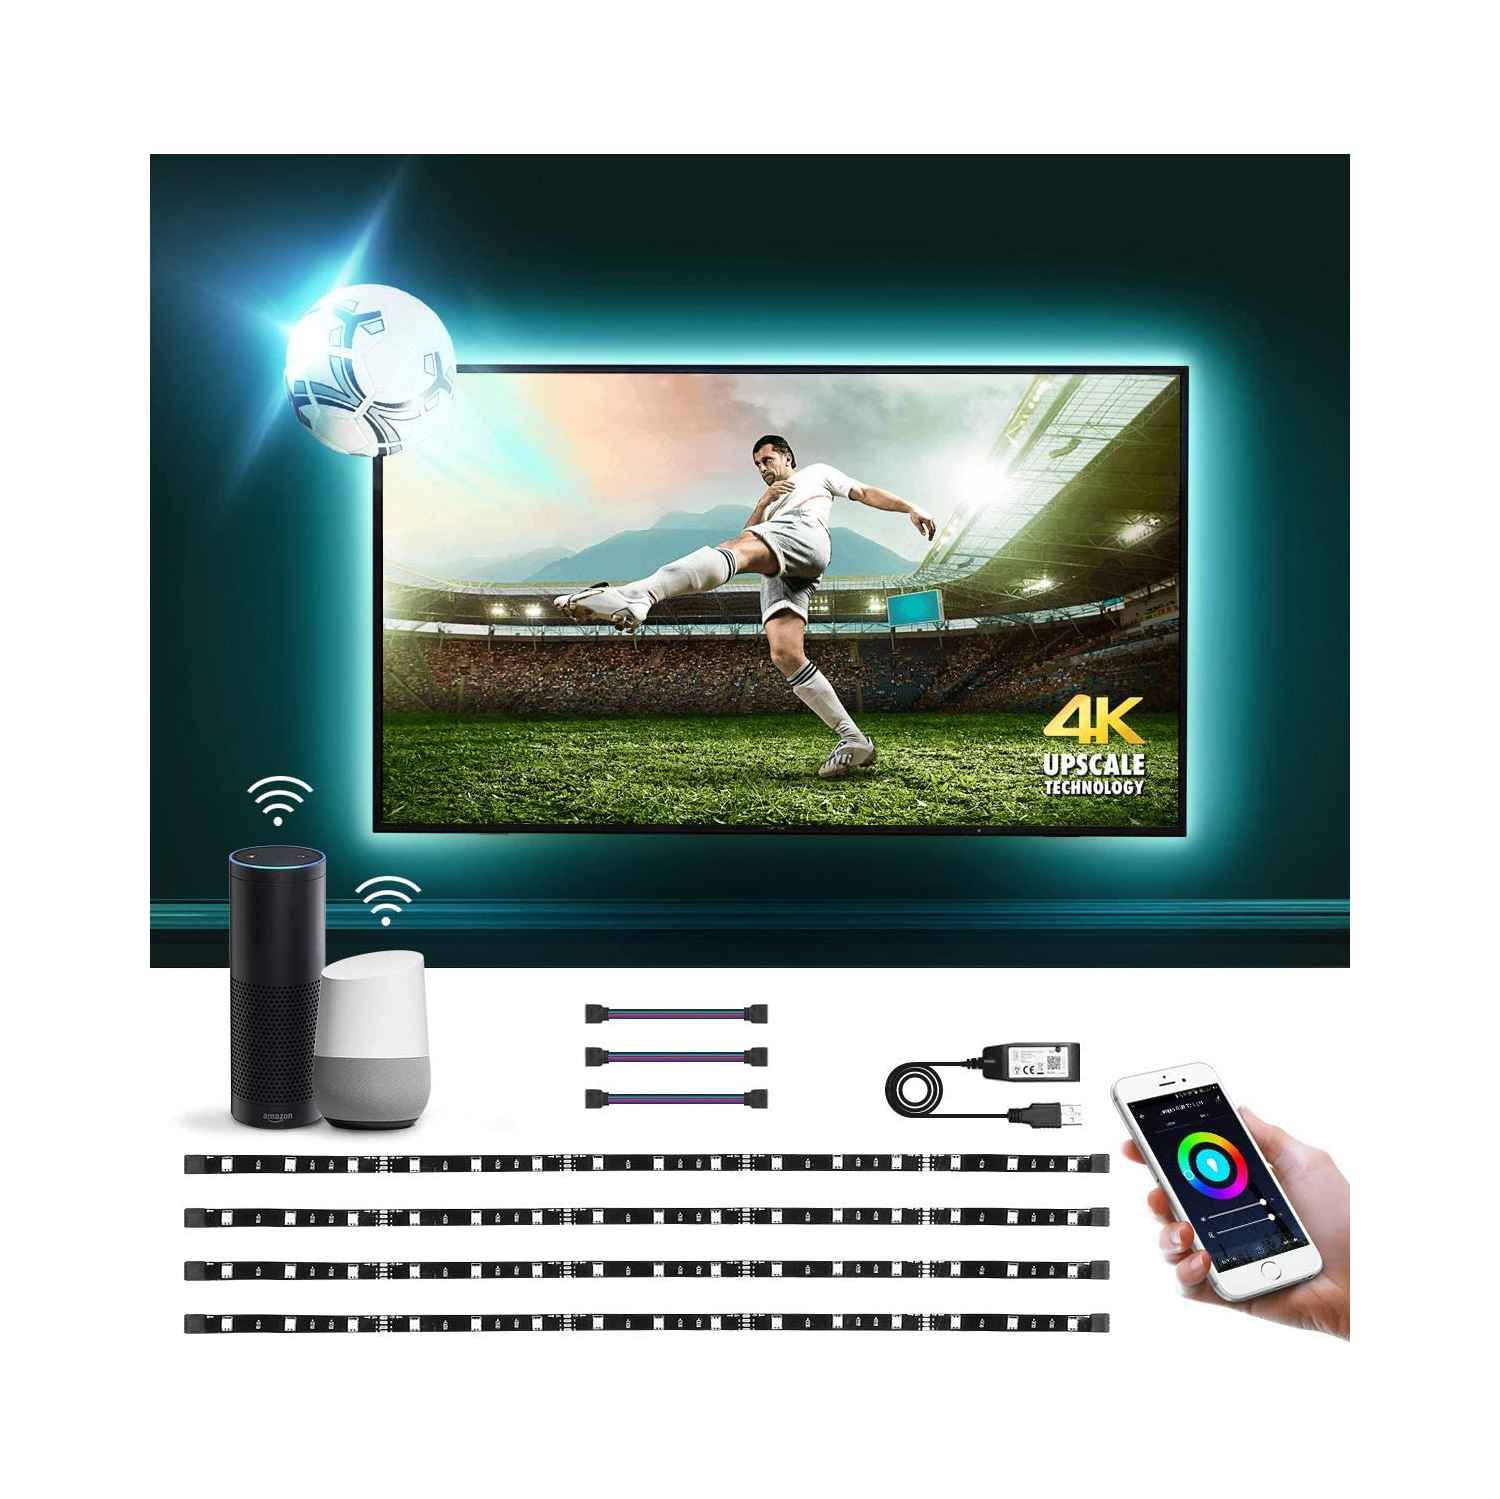 LE Smart Wifi TV Backlight Works with Alexa, 6.56ft RGB Dimmable TV LED Light Works with Alexa, Google Assistant, APP Remote Control, Voice Control